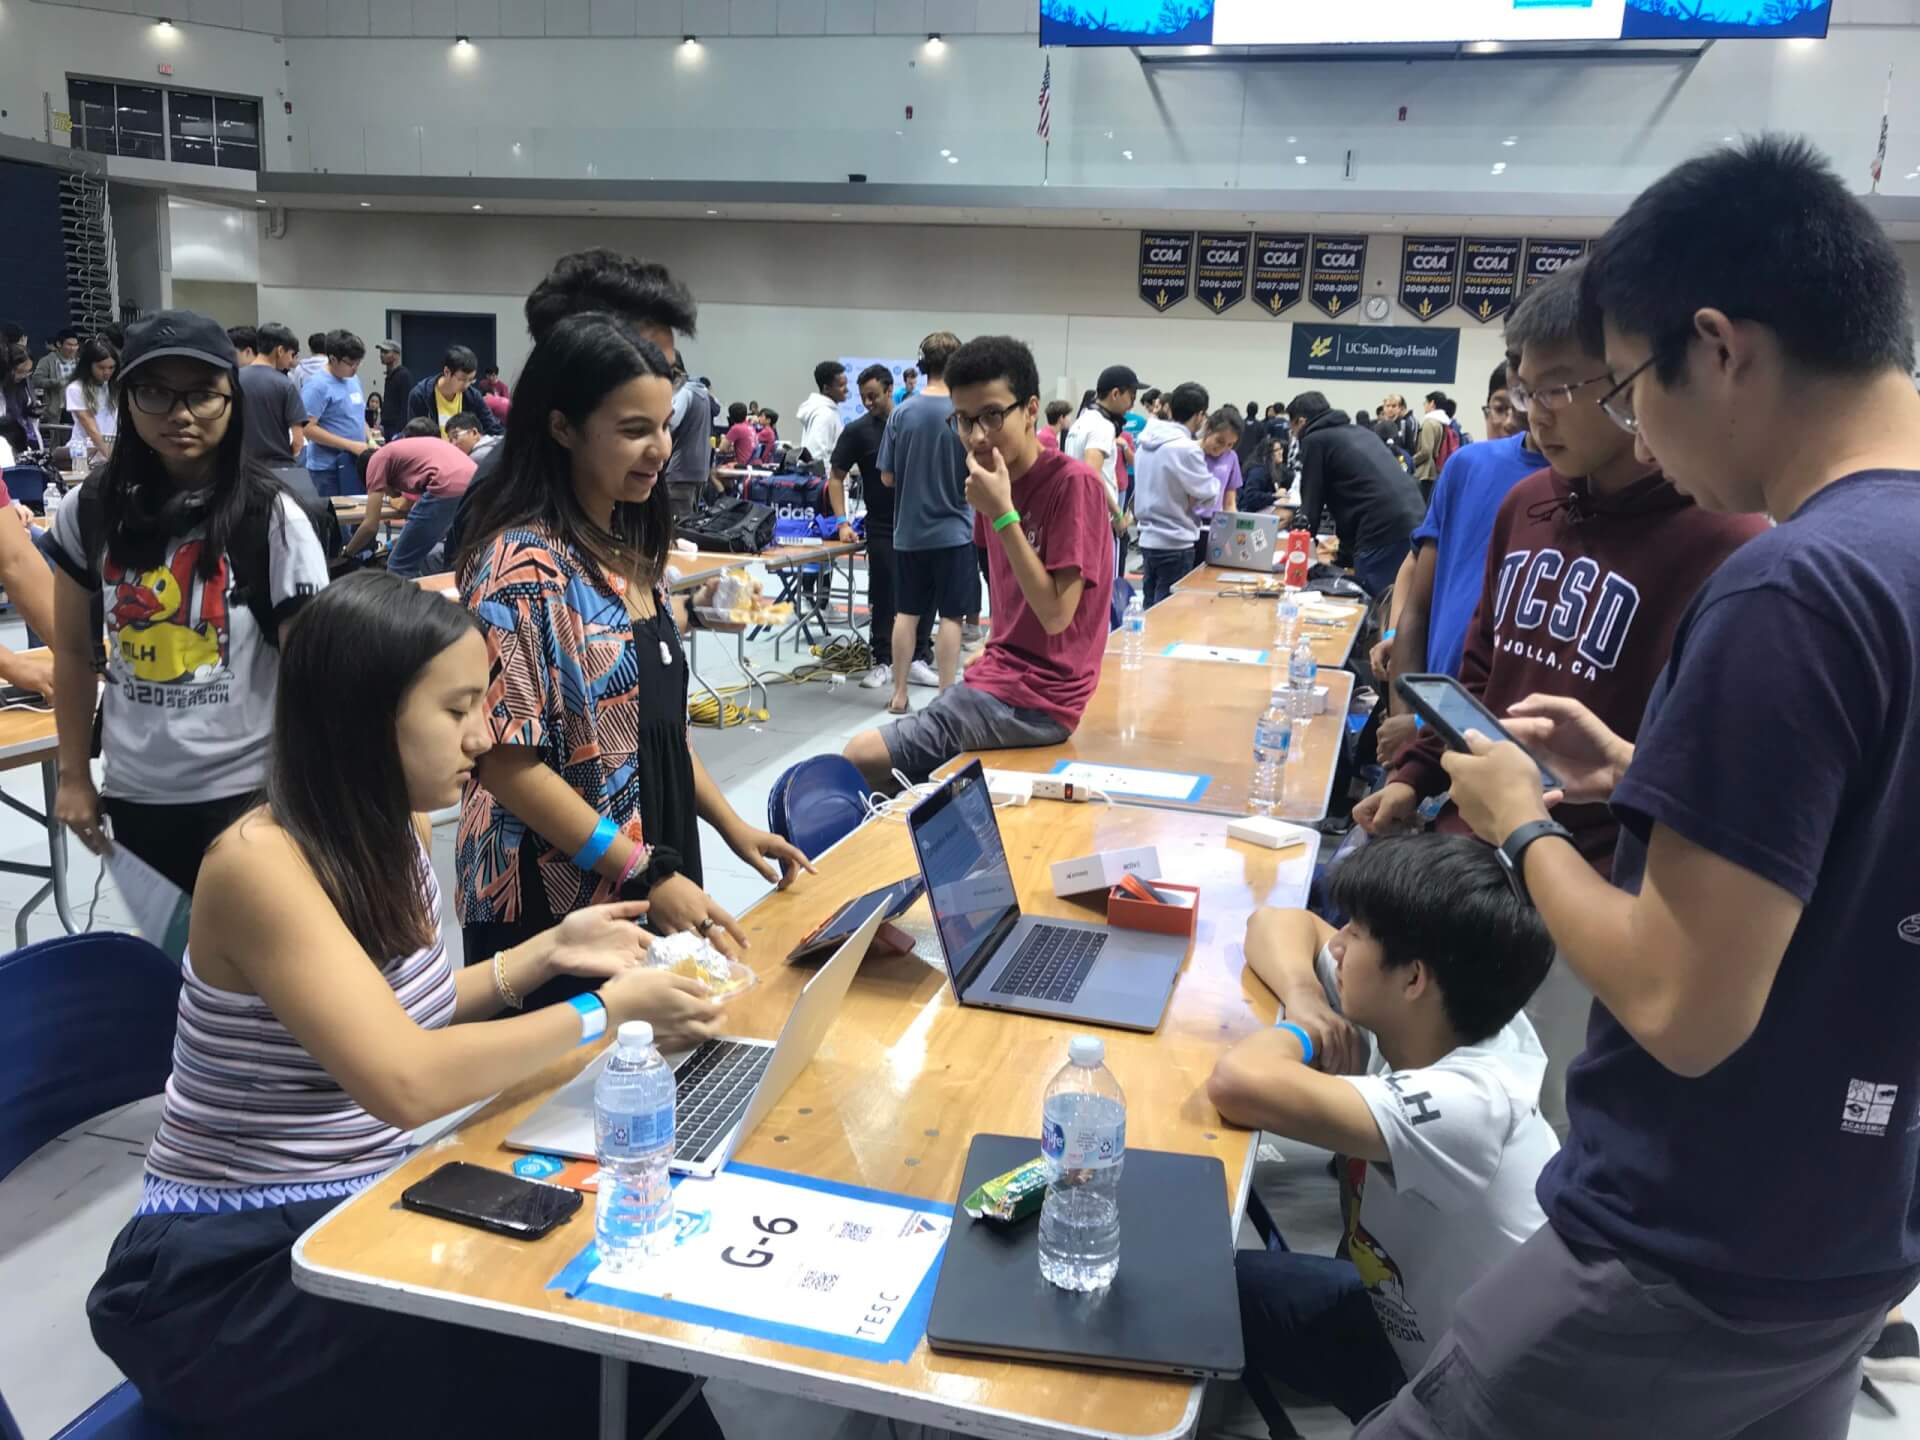 Crowded gymnasium filled with college-aged students at a hackathon.